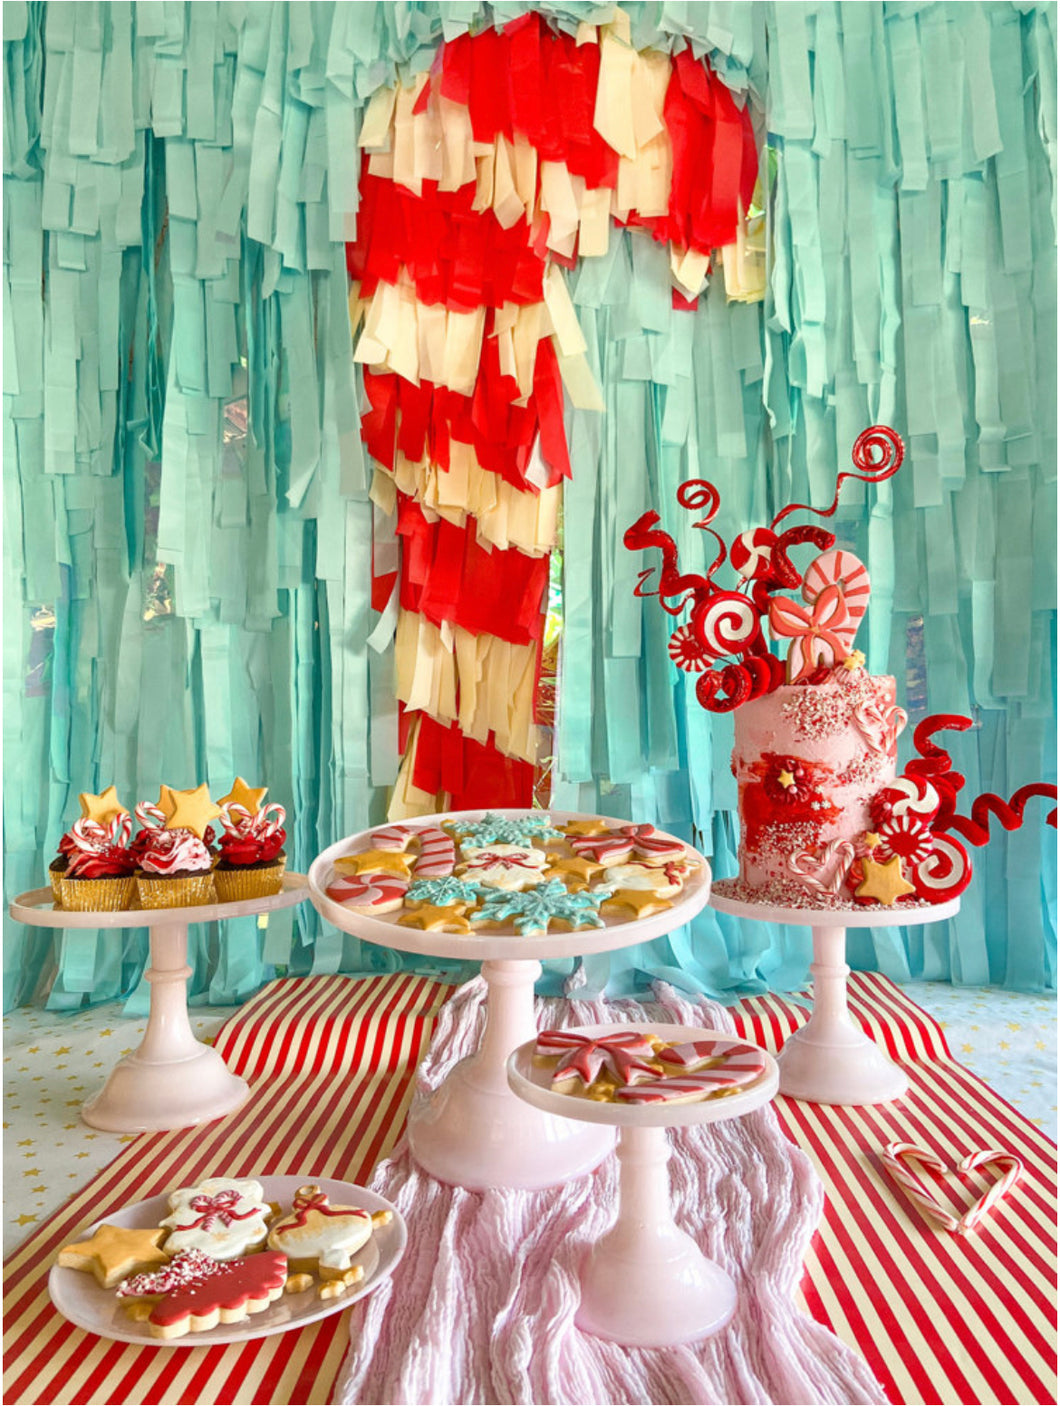 Glam Fete Christmas Candy Cane Fringe Backdrop Wall on Plastic Fencing